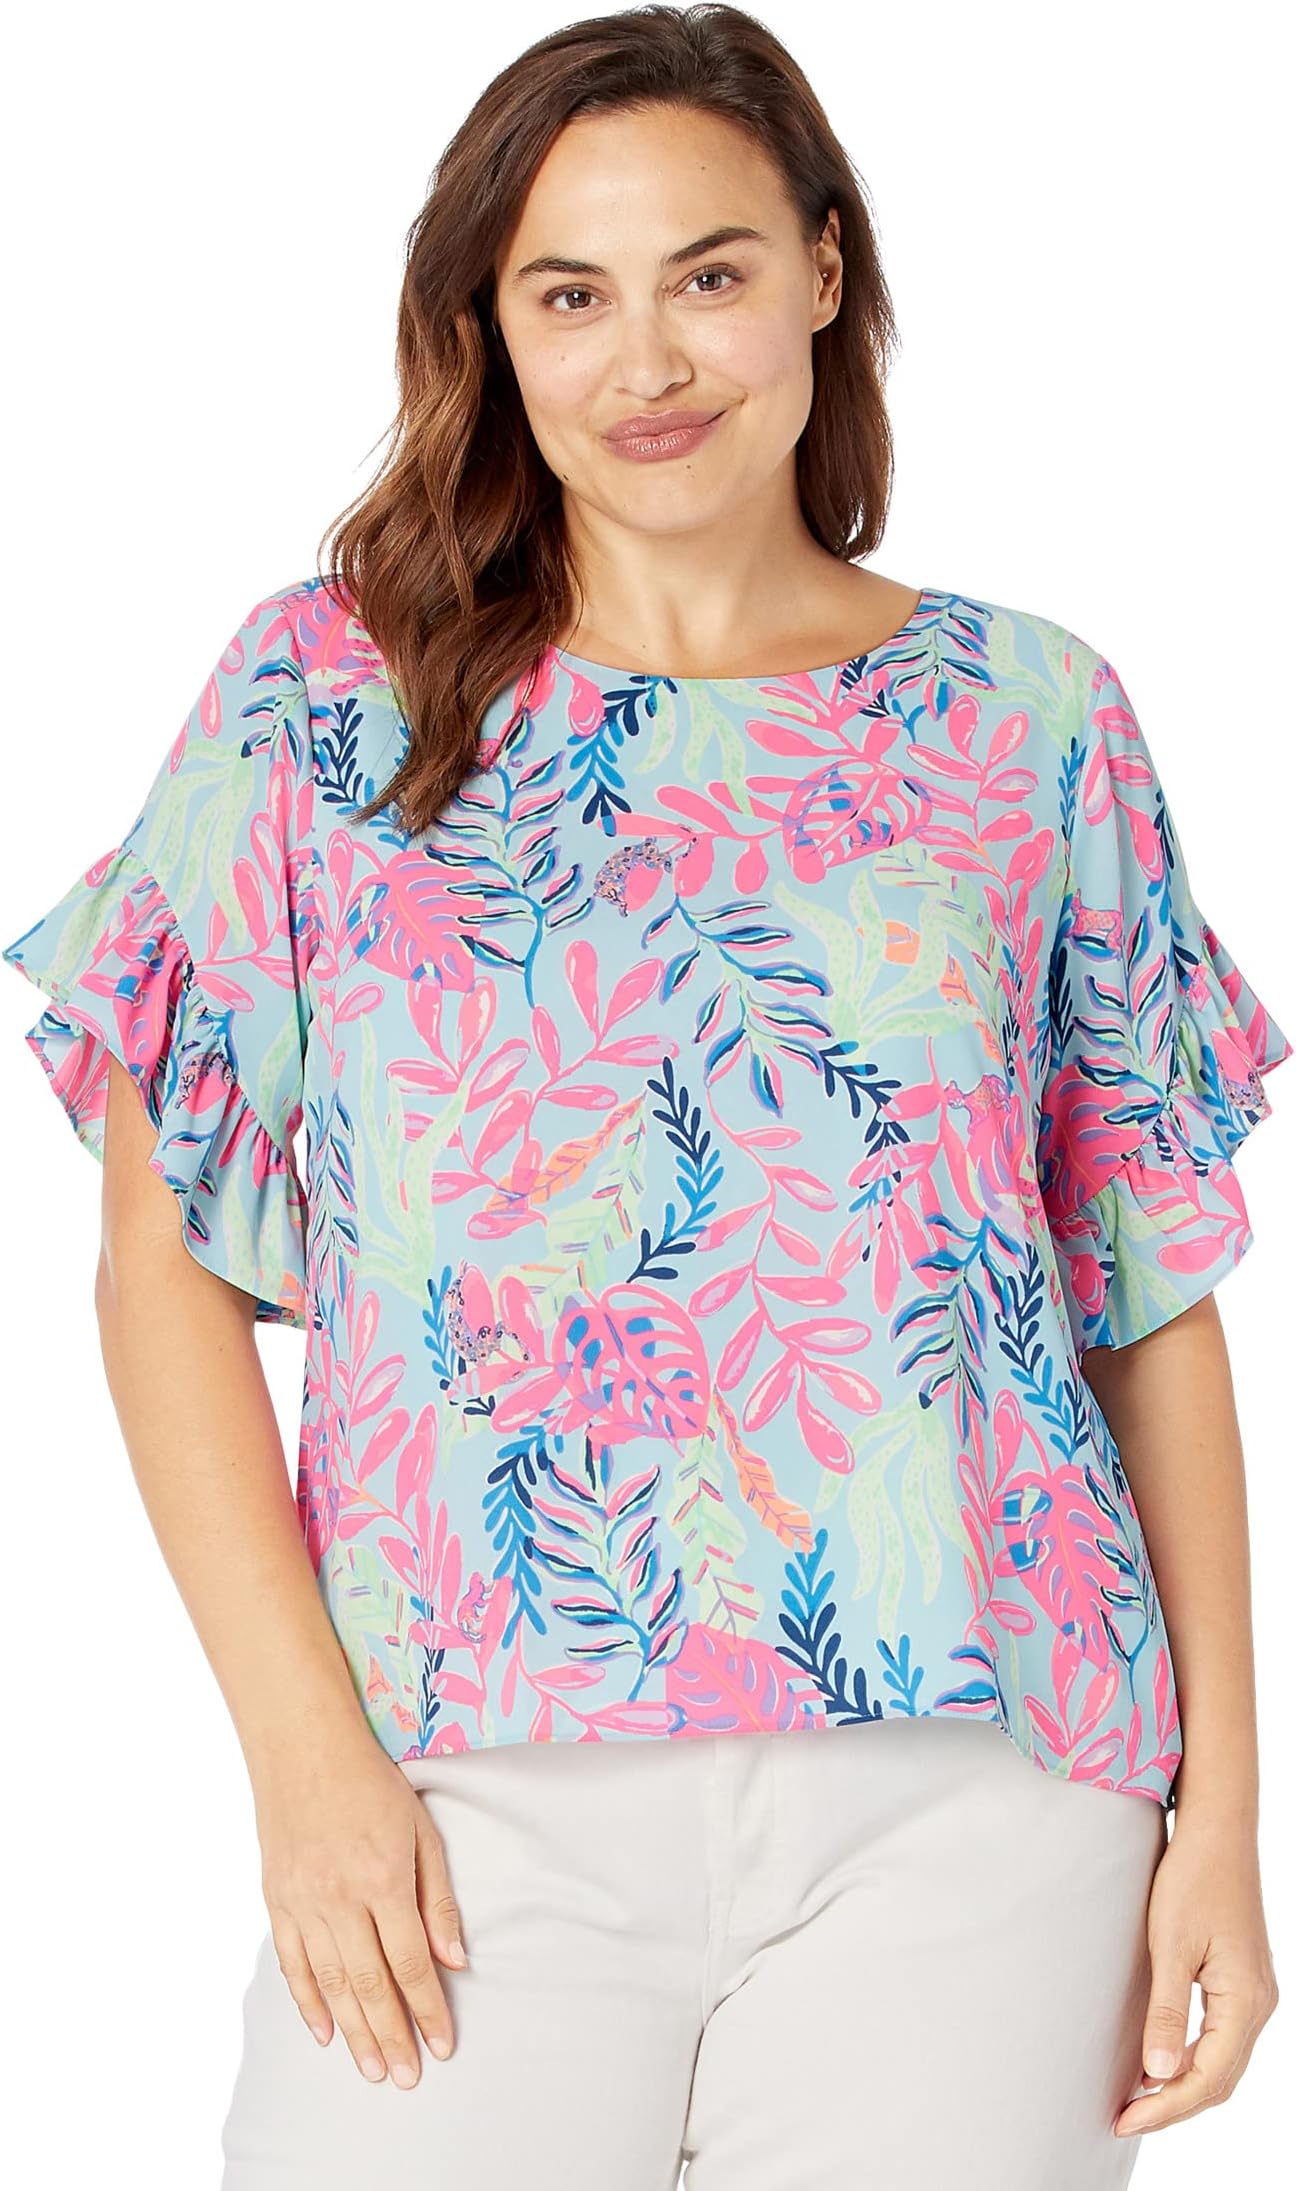 Дарла Топ Lilly Pulitzer, цвет Porto Blue Youve Been Spotted